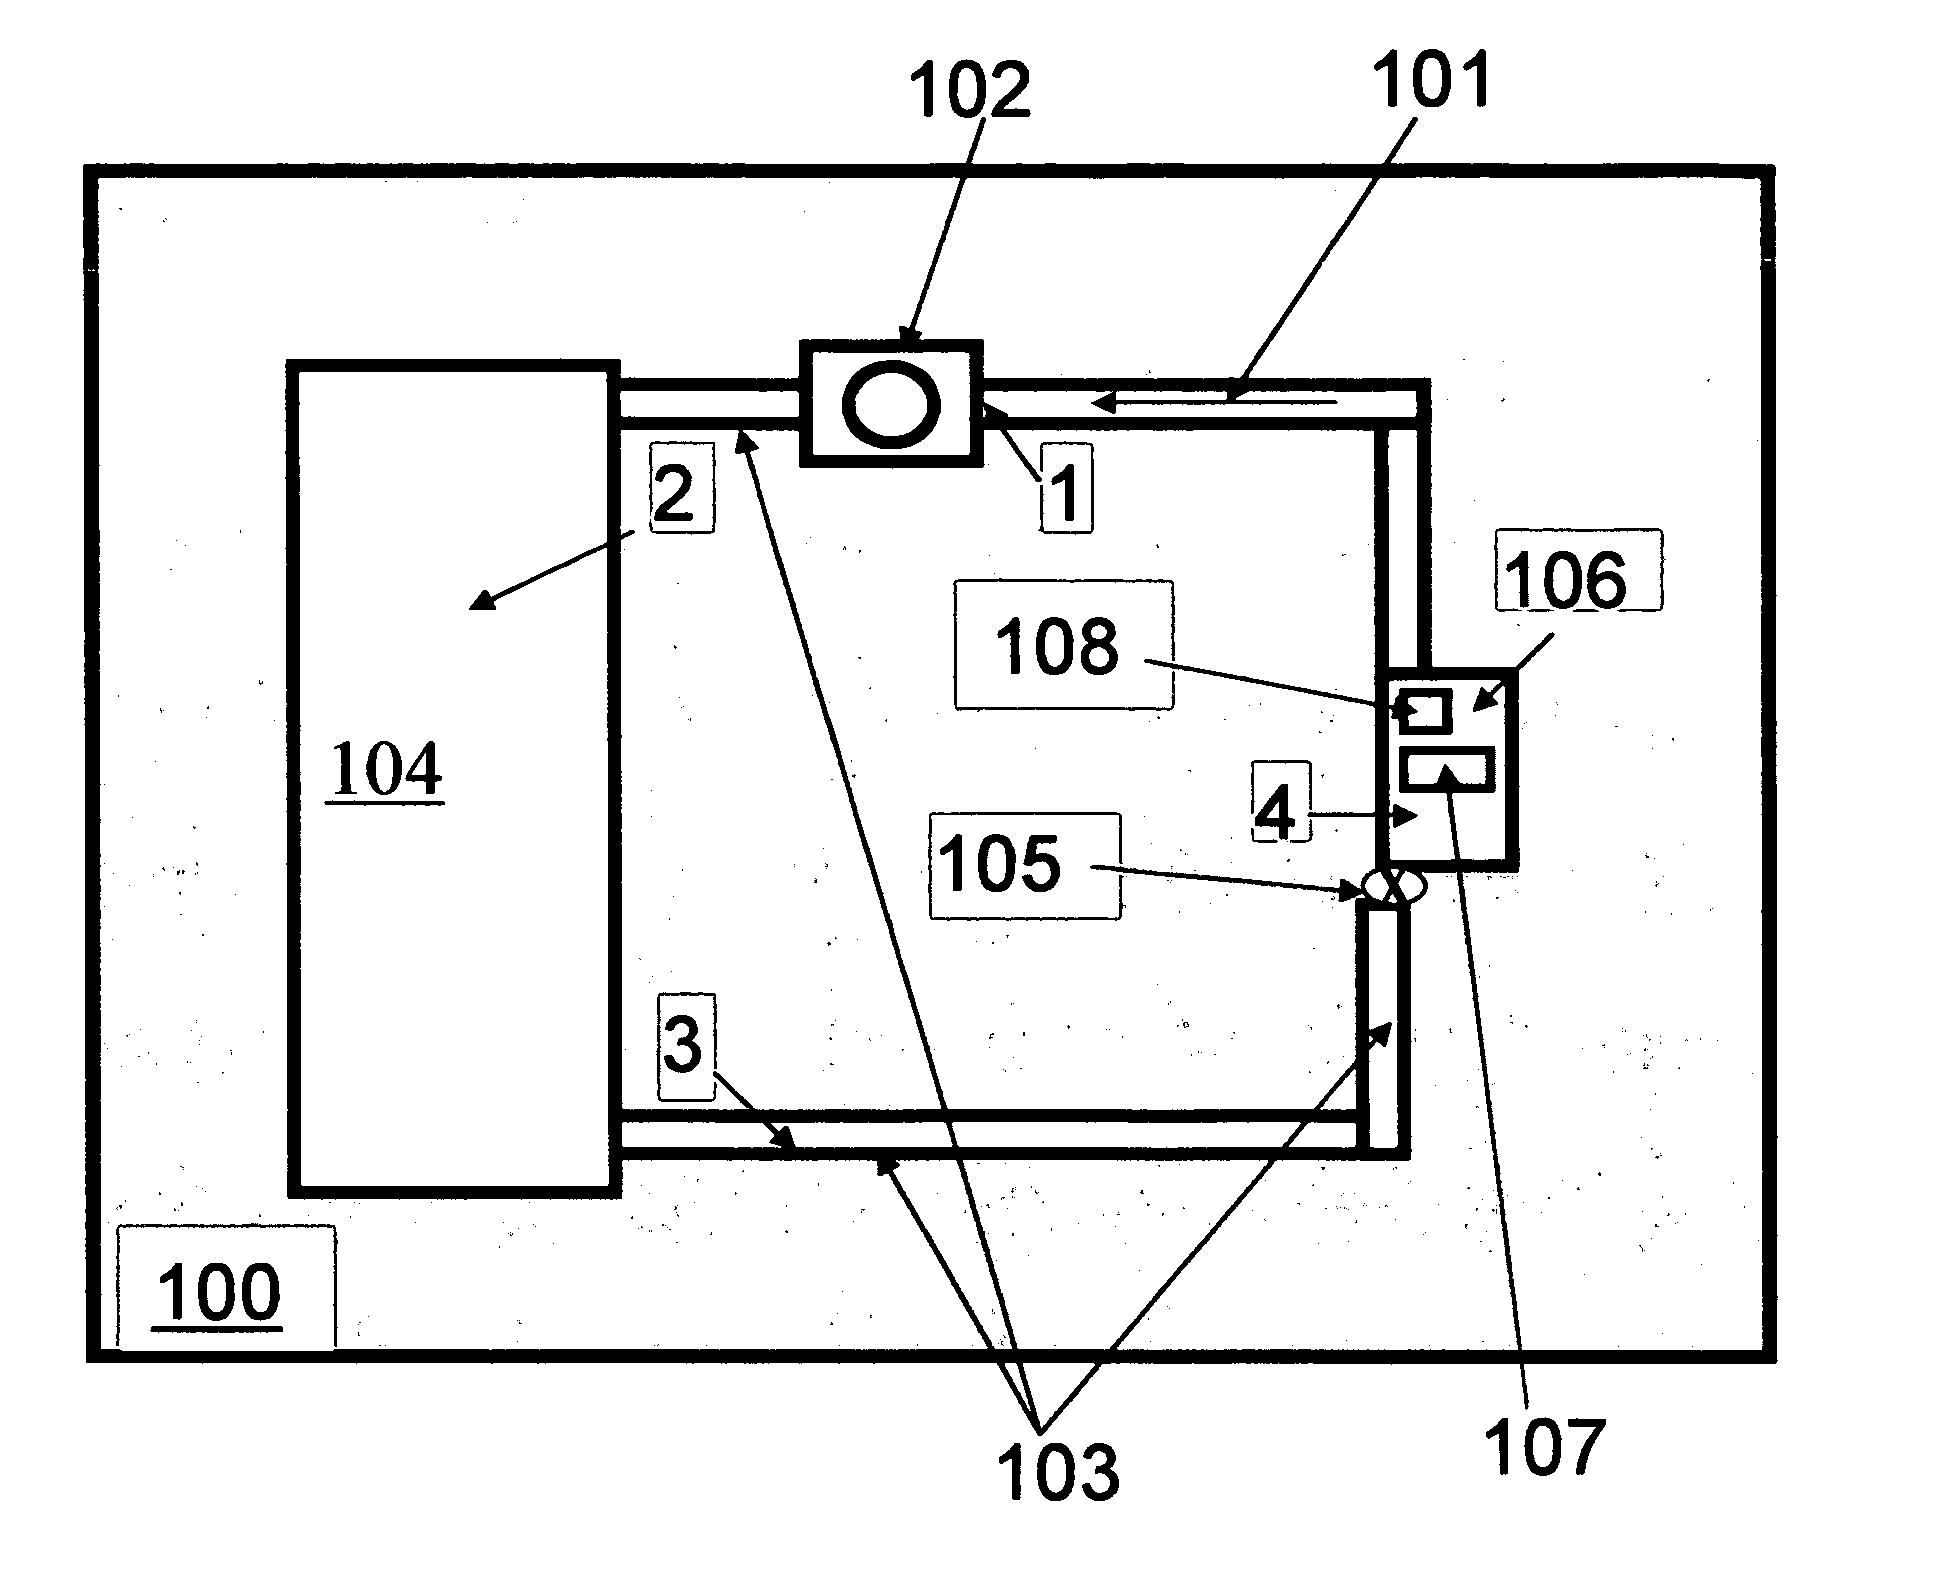 MEMS based micro vapor compression refrigeration system for microelectronic and photonic thermal control